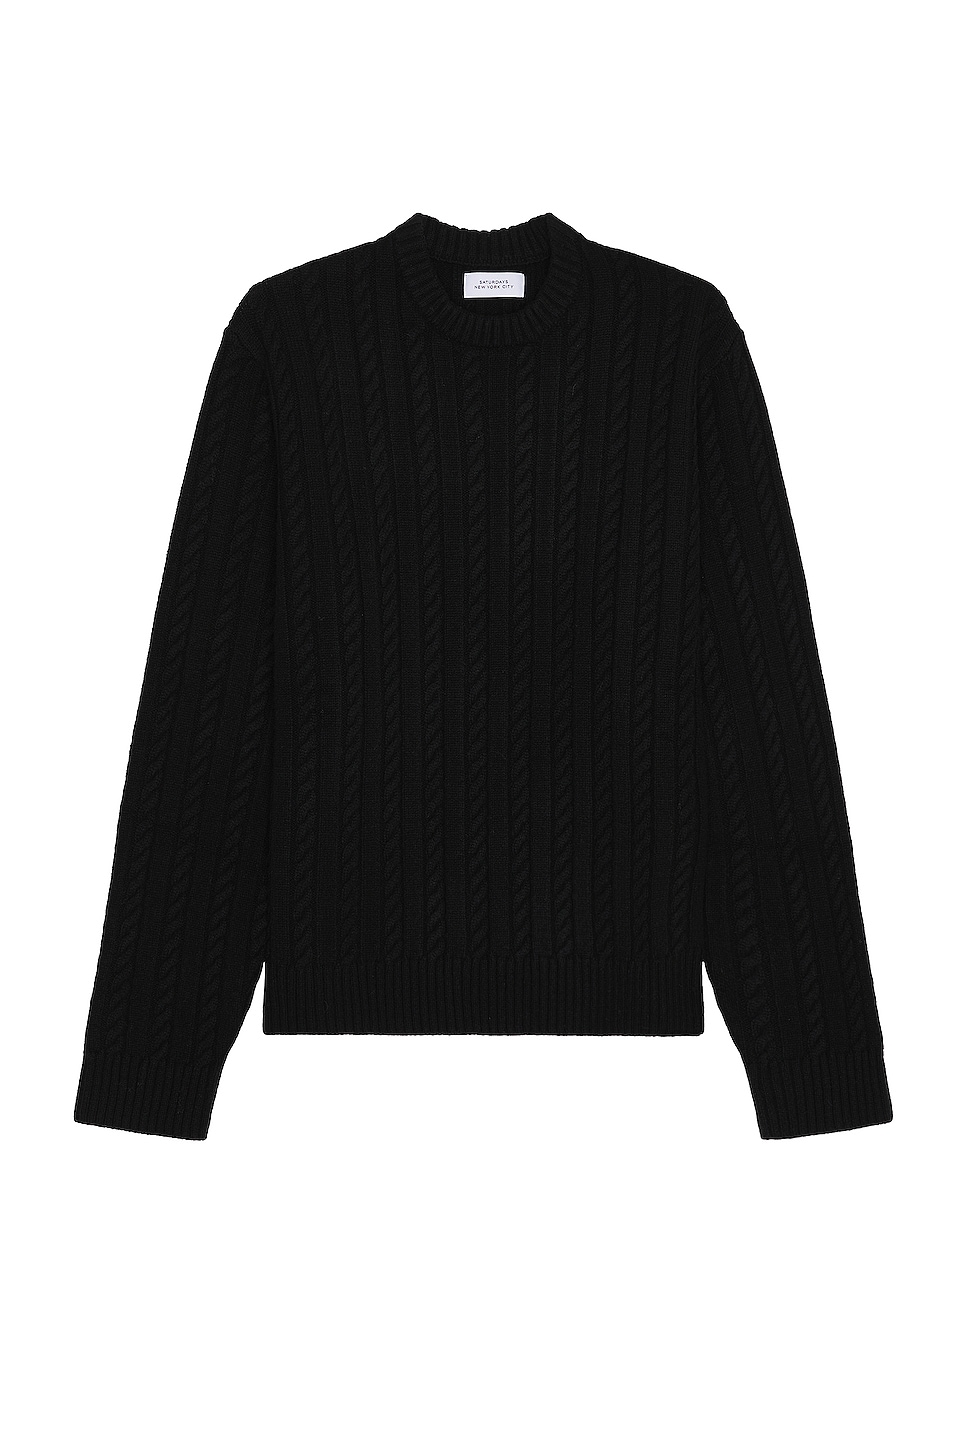 Nico Cable Knit Sweater in Black